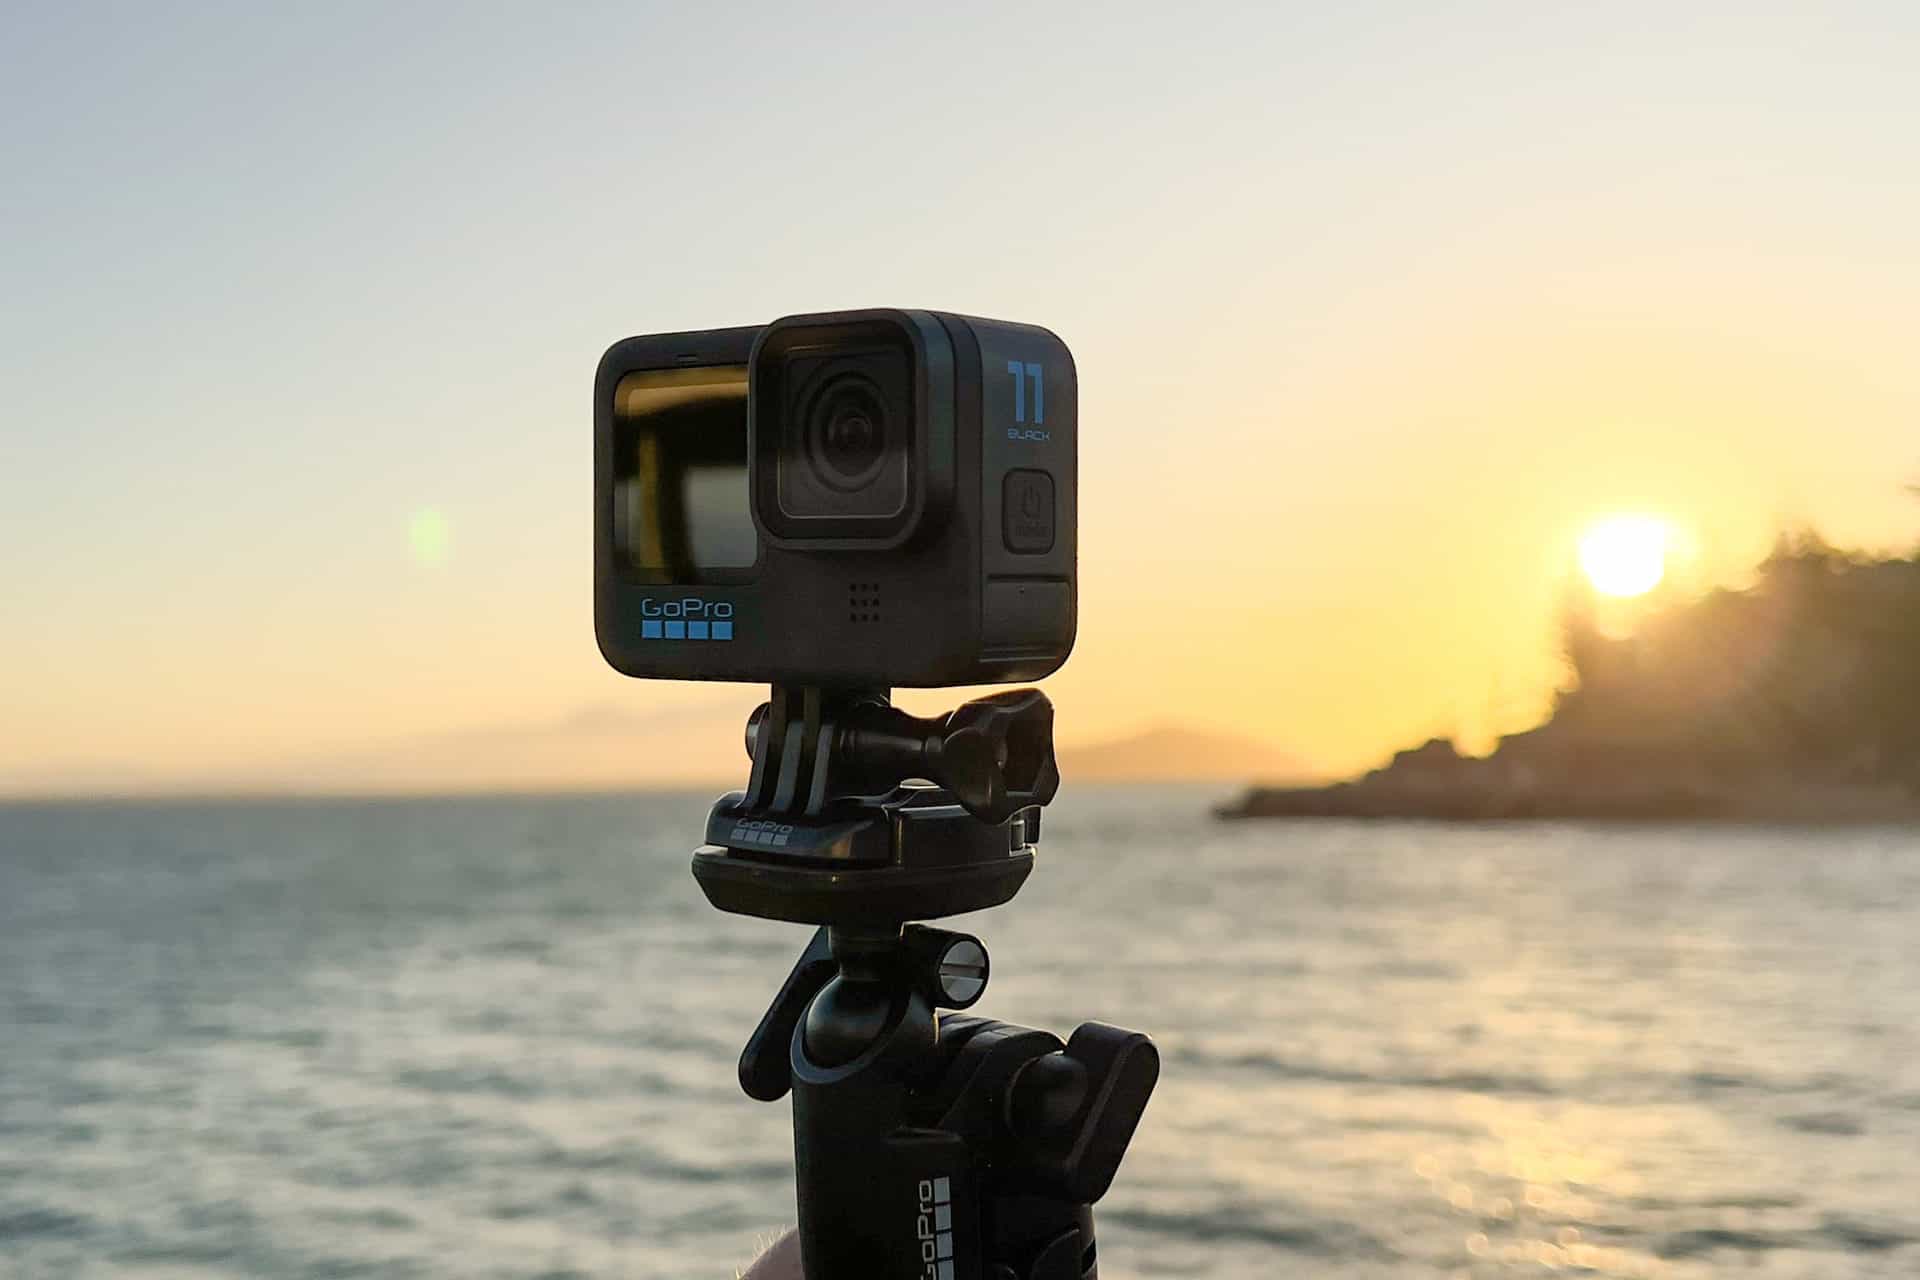 How To Watch Video On Gopro